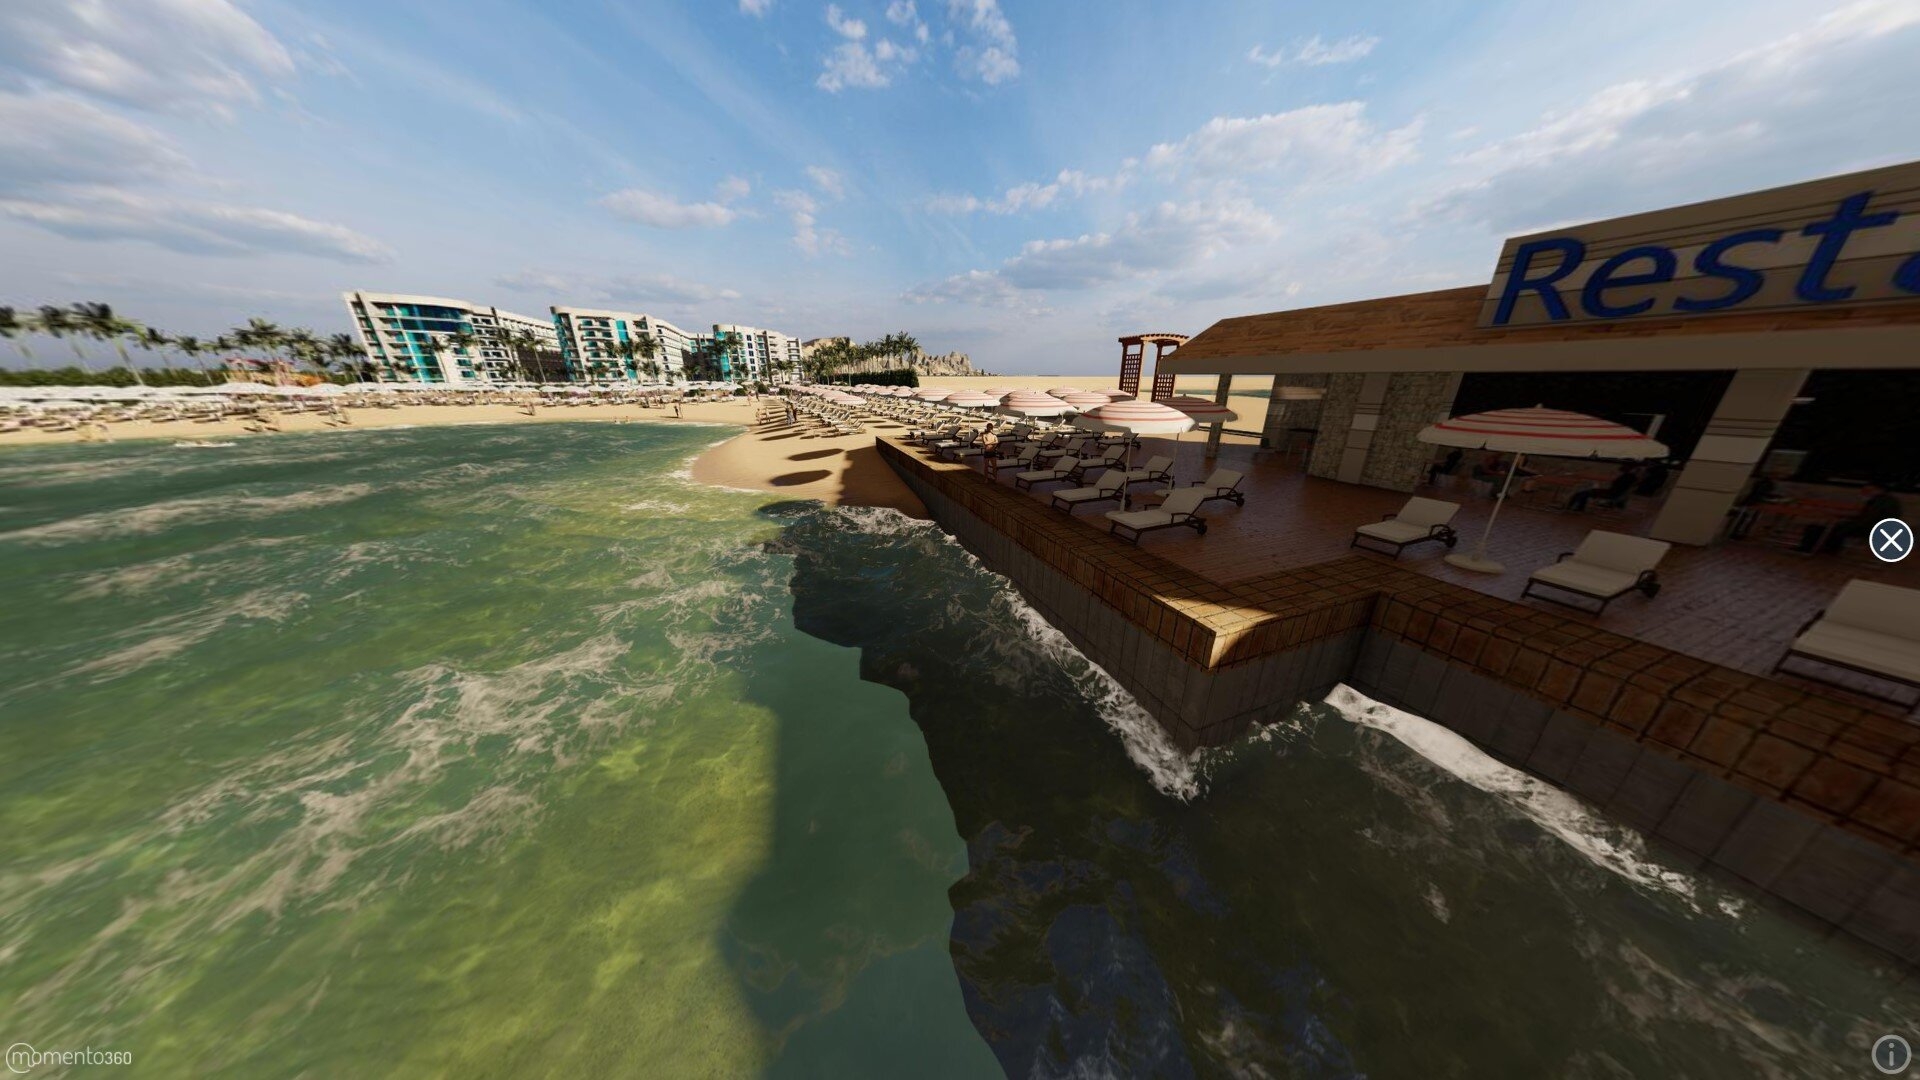 Scandic+Resort+render+from+the+360+April+21+(4)